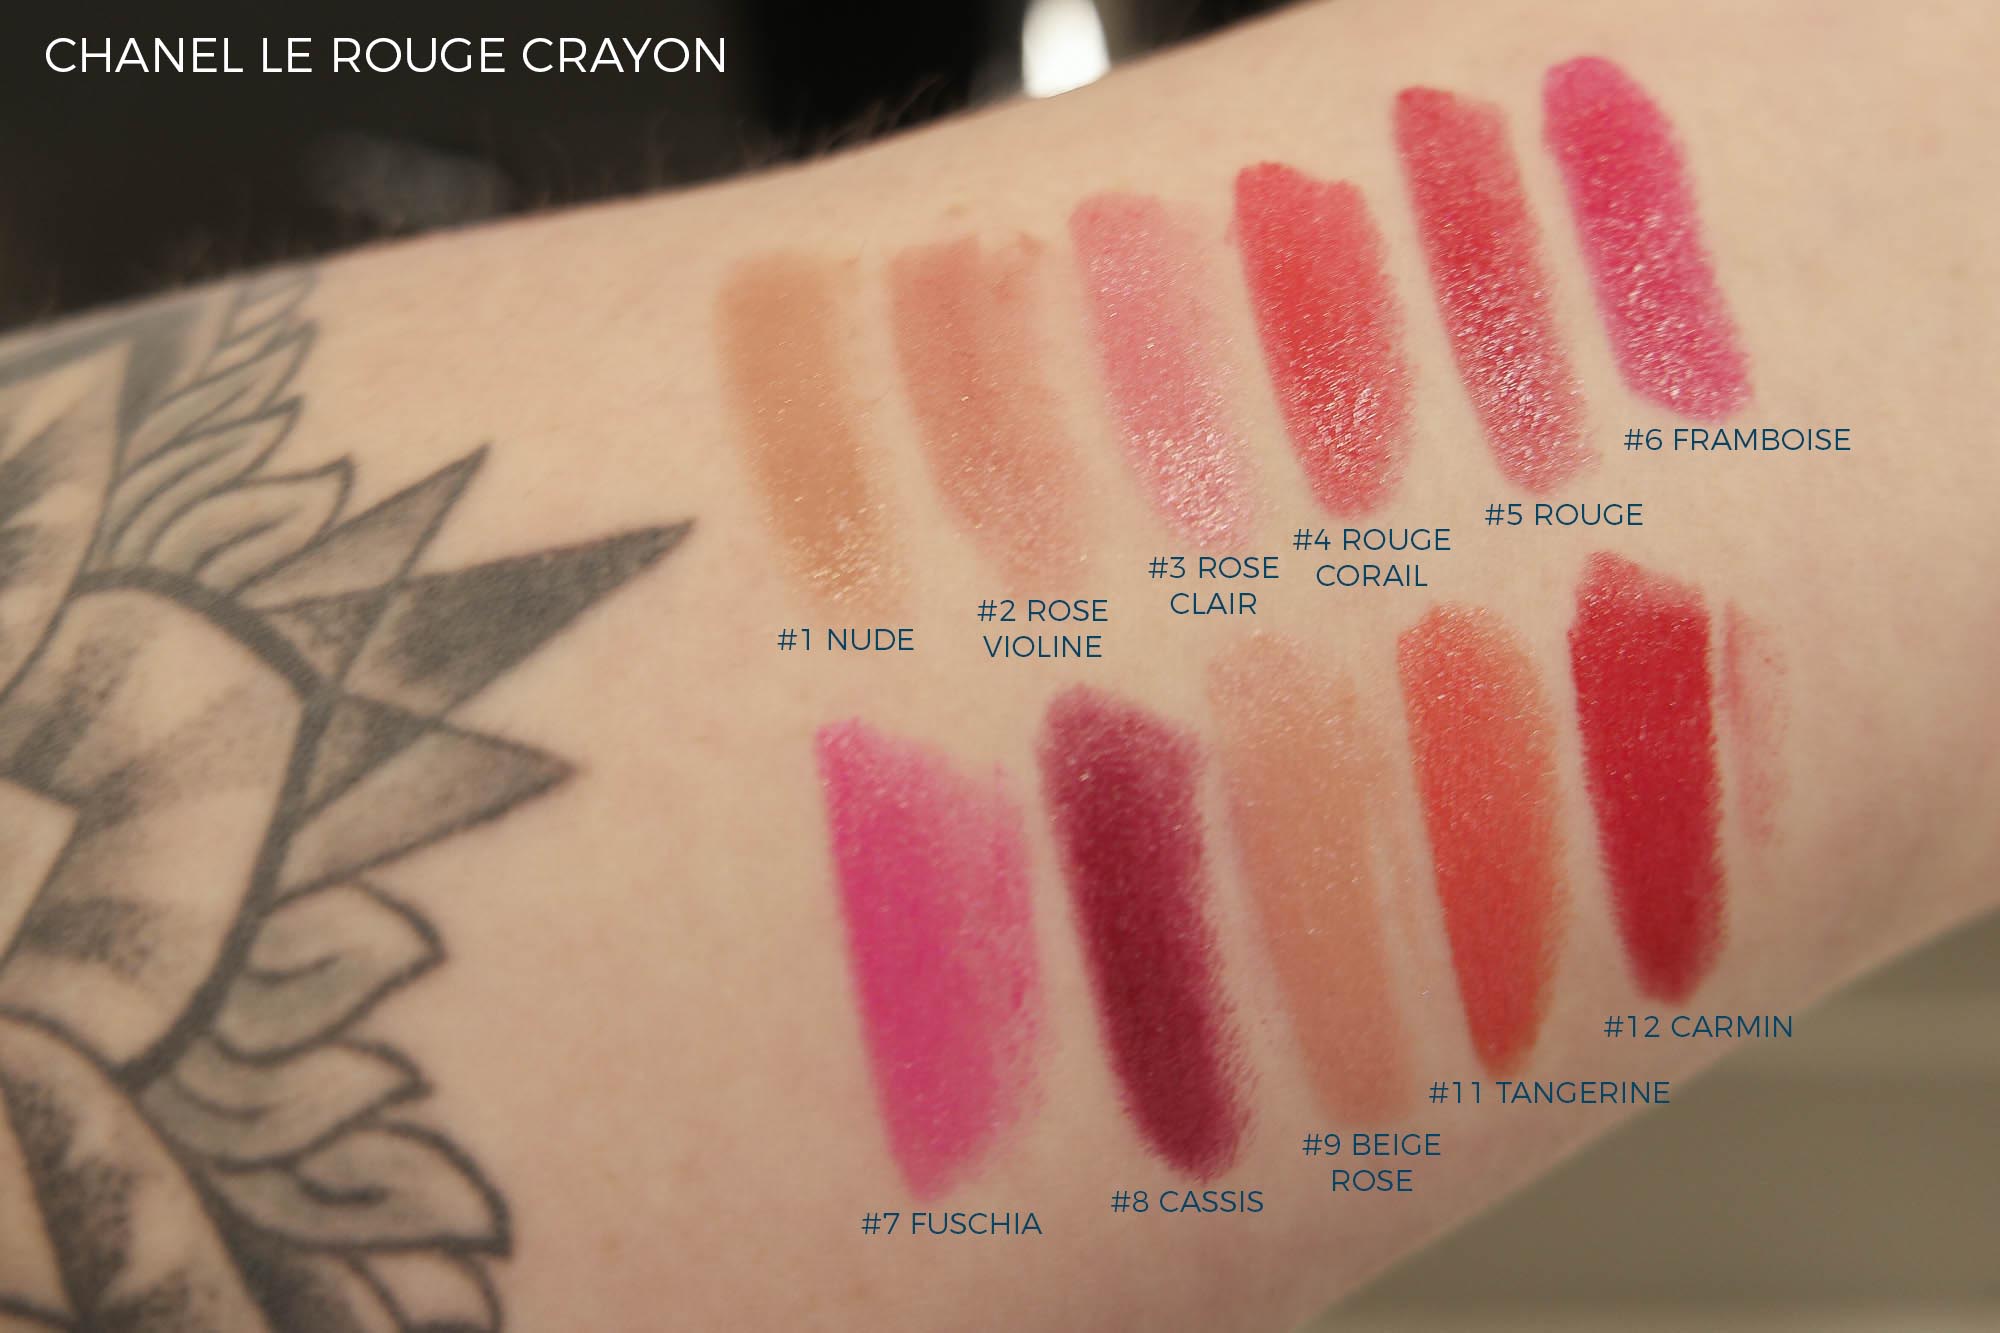 Lipstick swatches galore - Chanel Le Rouge Crayon